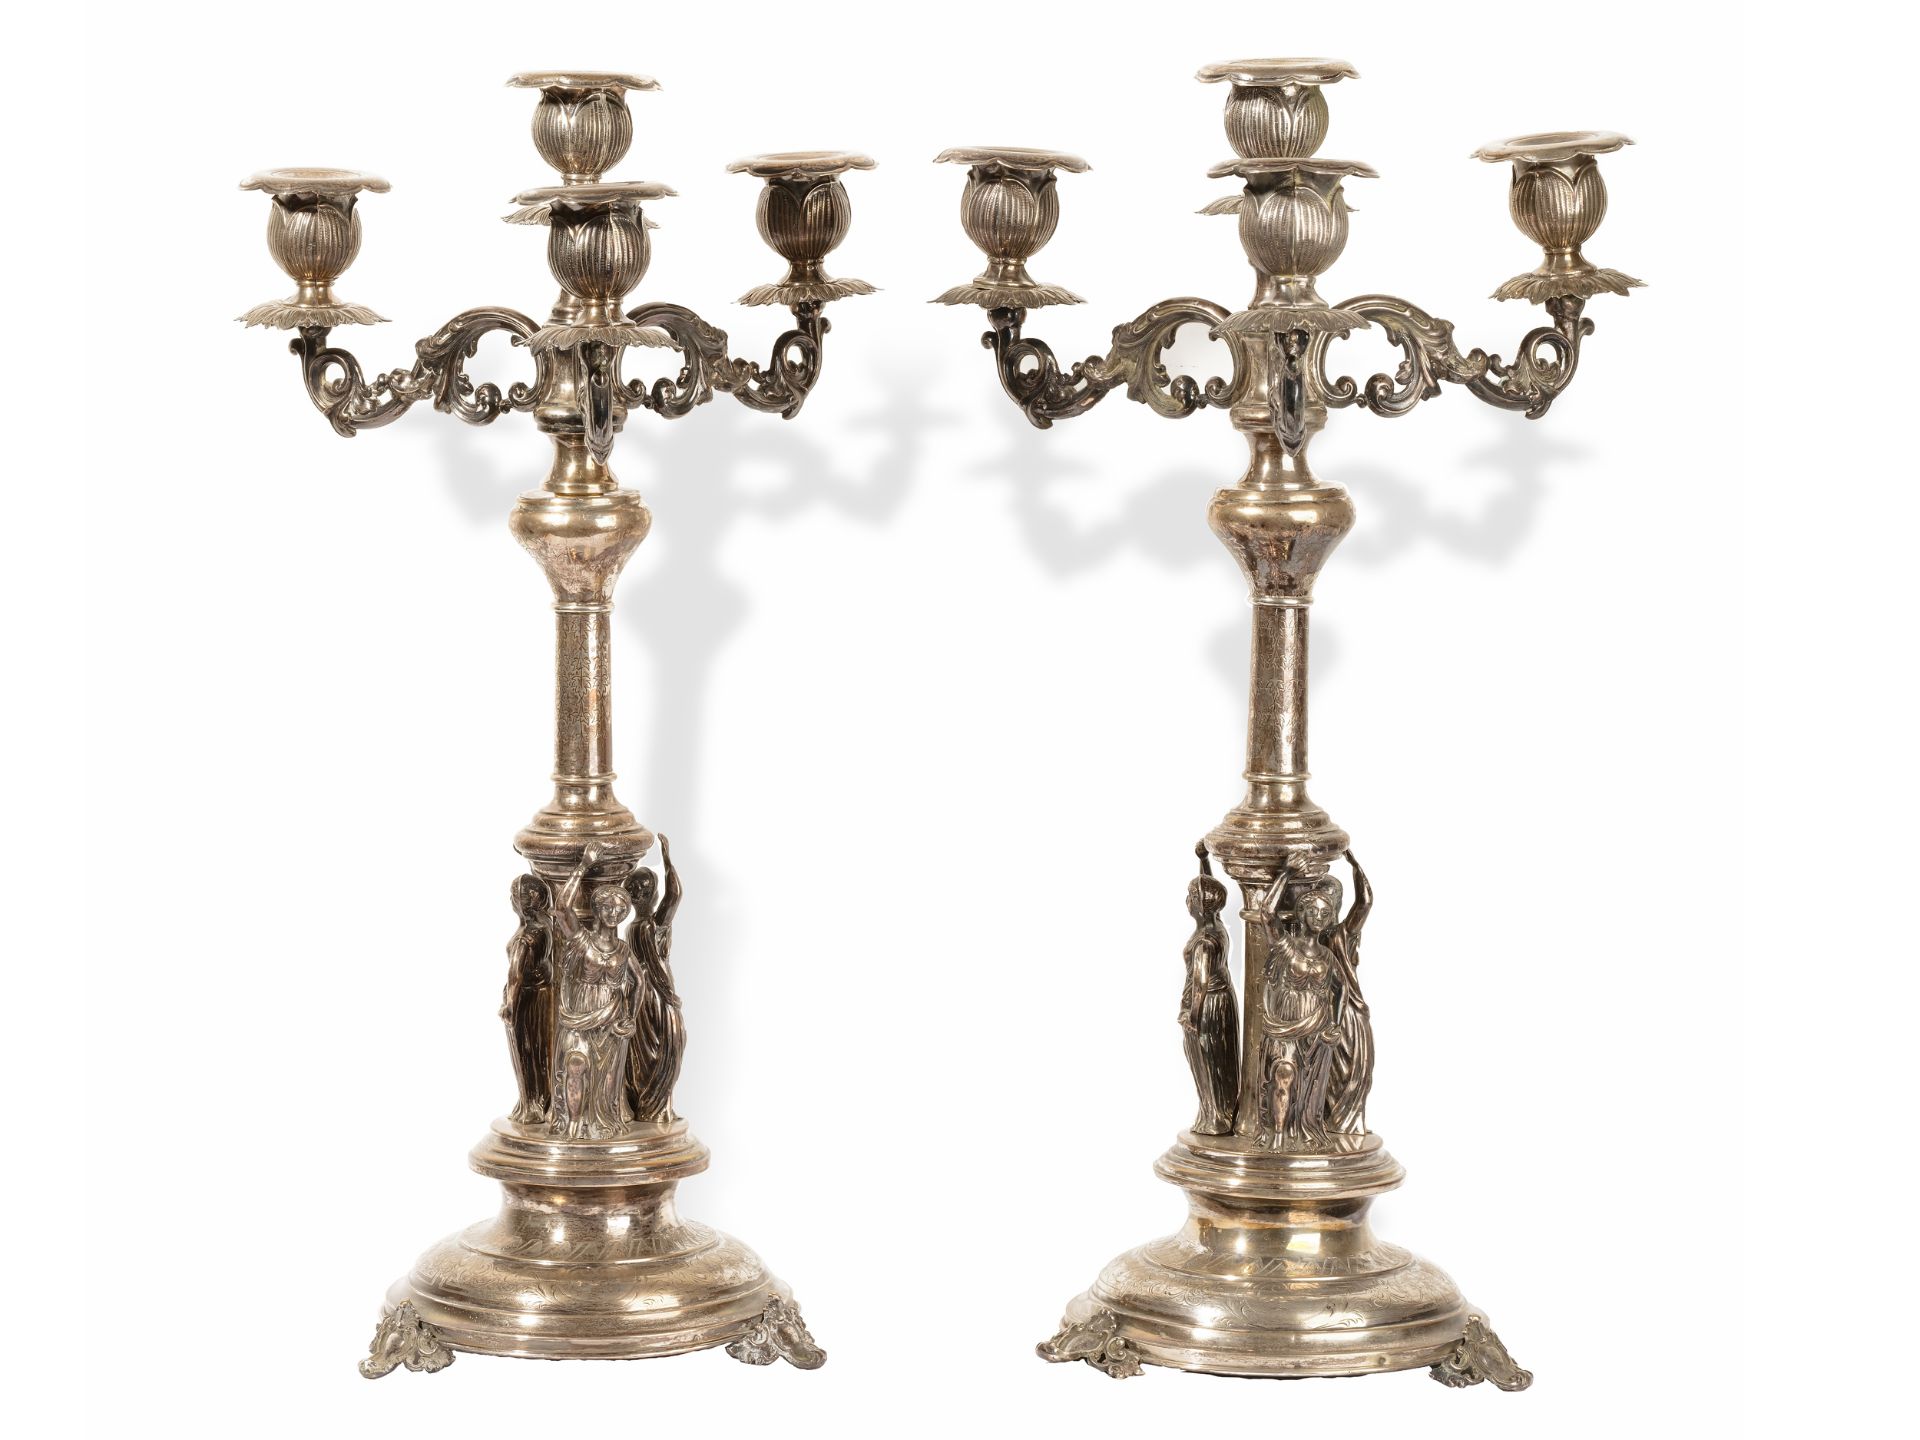 Pair of monumental candlesticks, 
Austria ca. 1900, 
Silver cast and chased